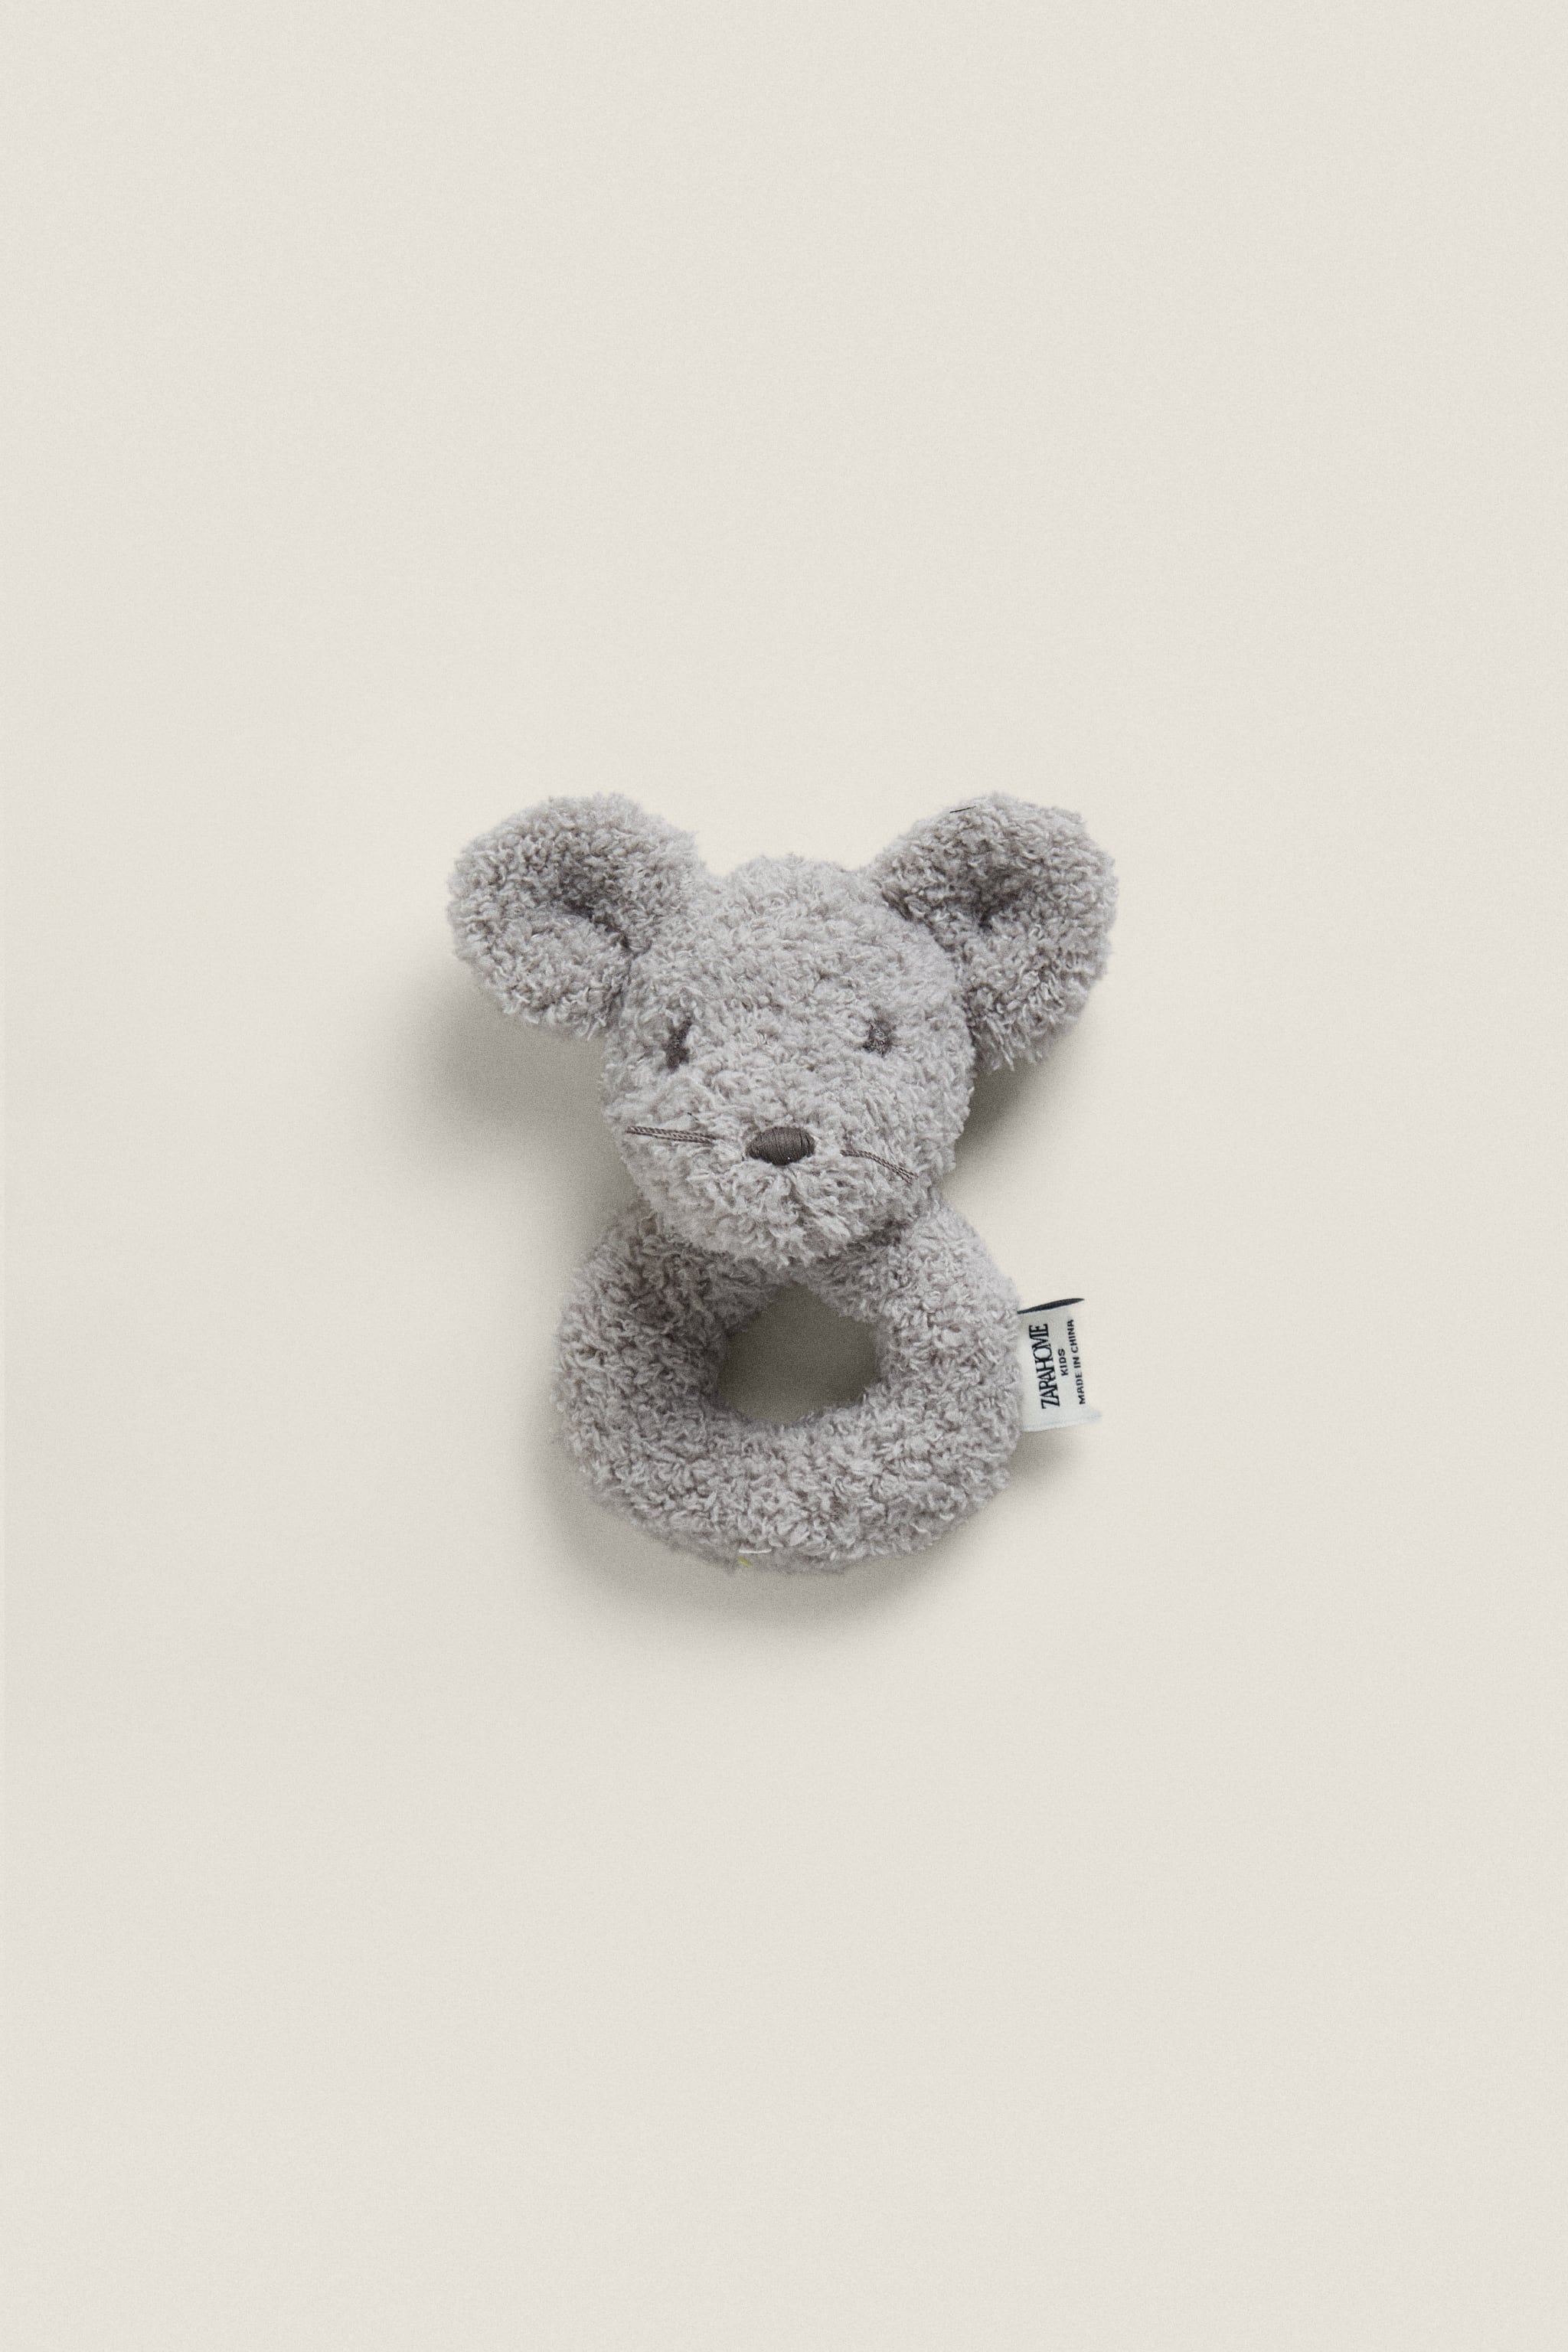 CHILDREN'S MOUSE PLUSH TOY RATTLE